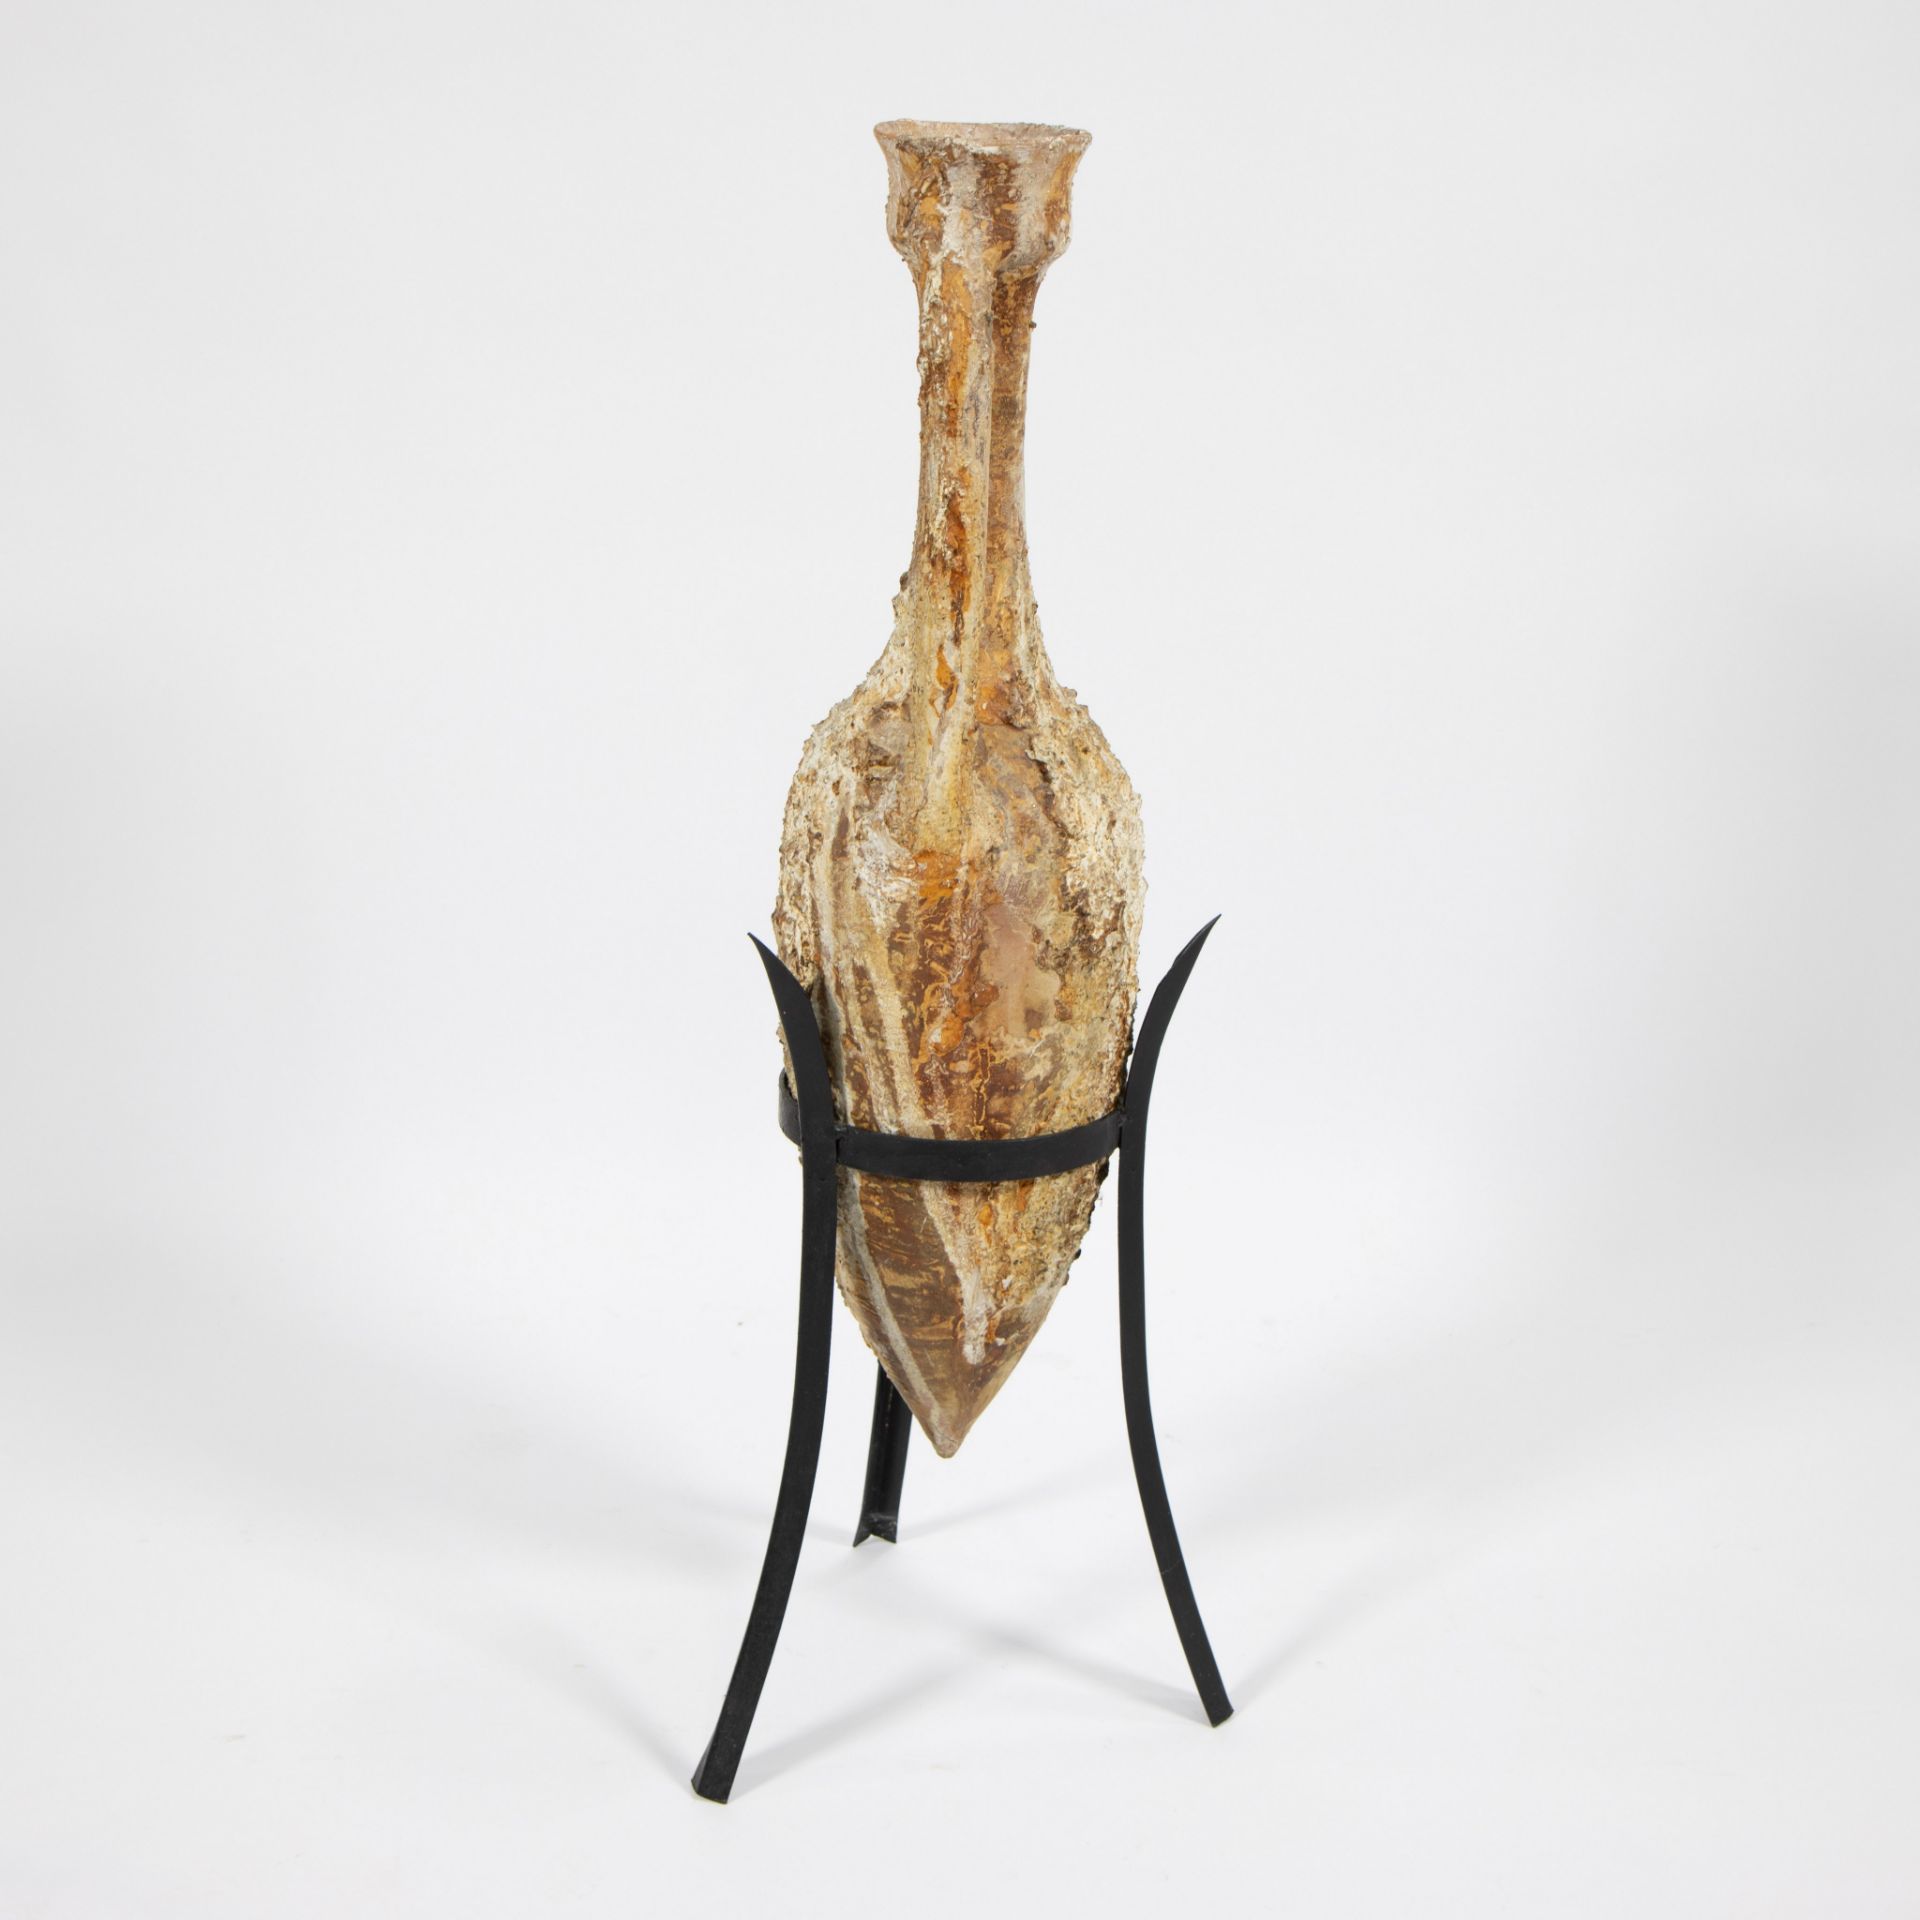 Roman terracotta amphora with wrought iron stand - Image 2 of 4